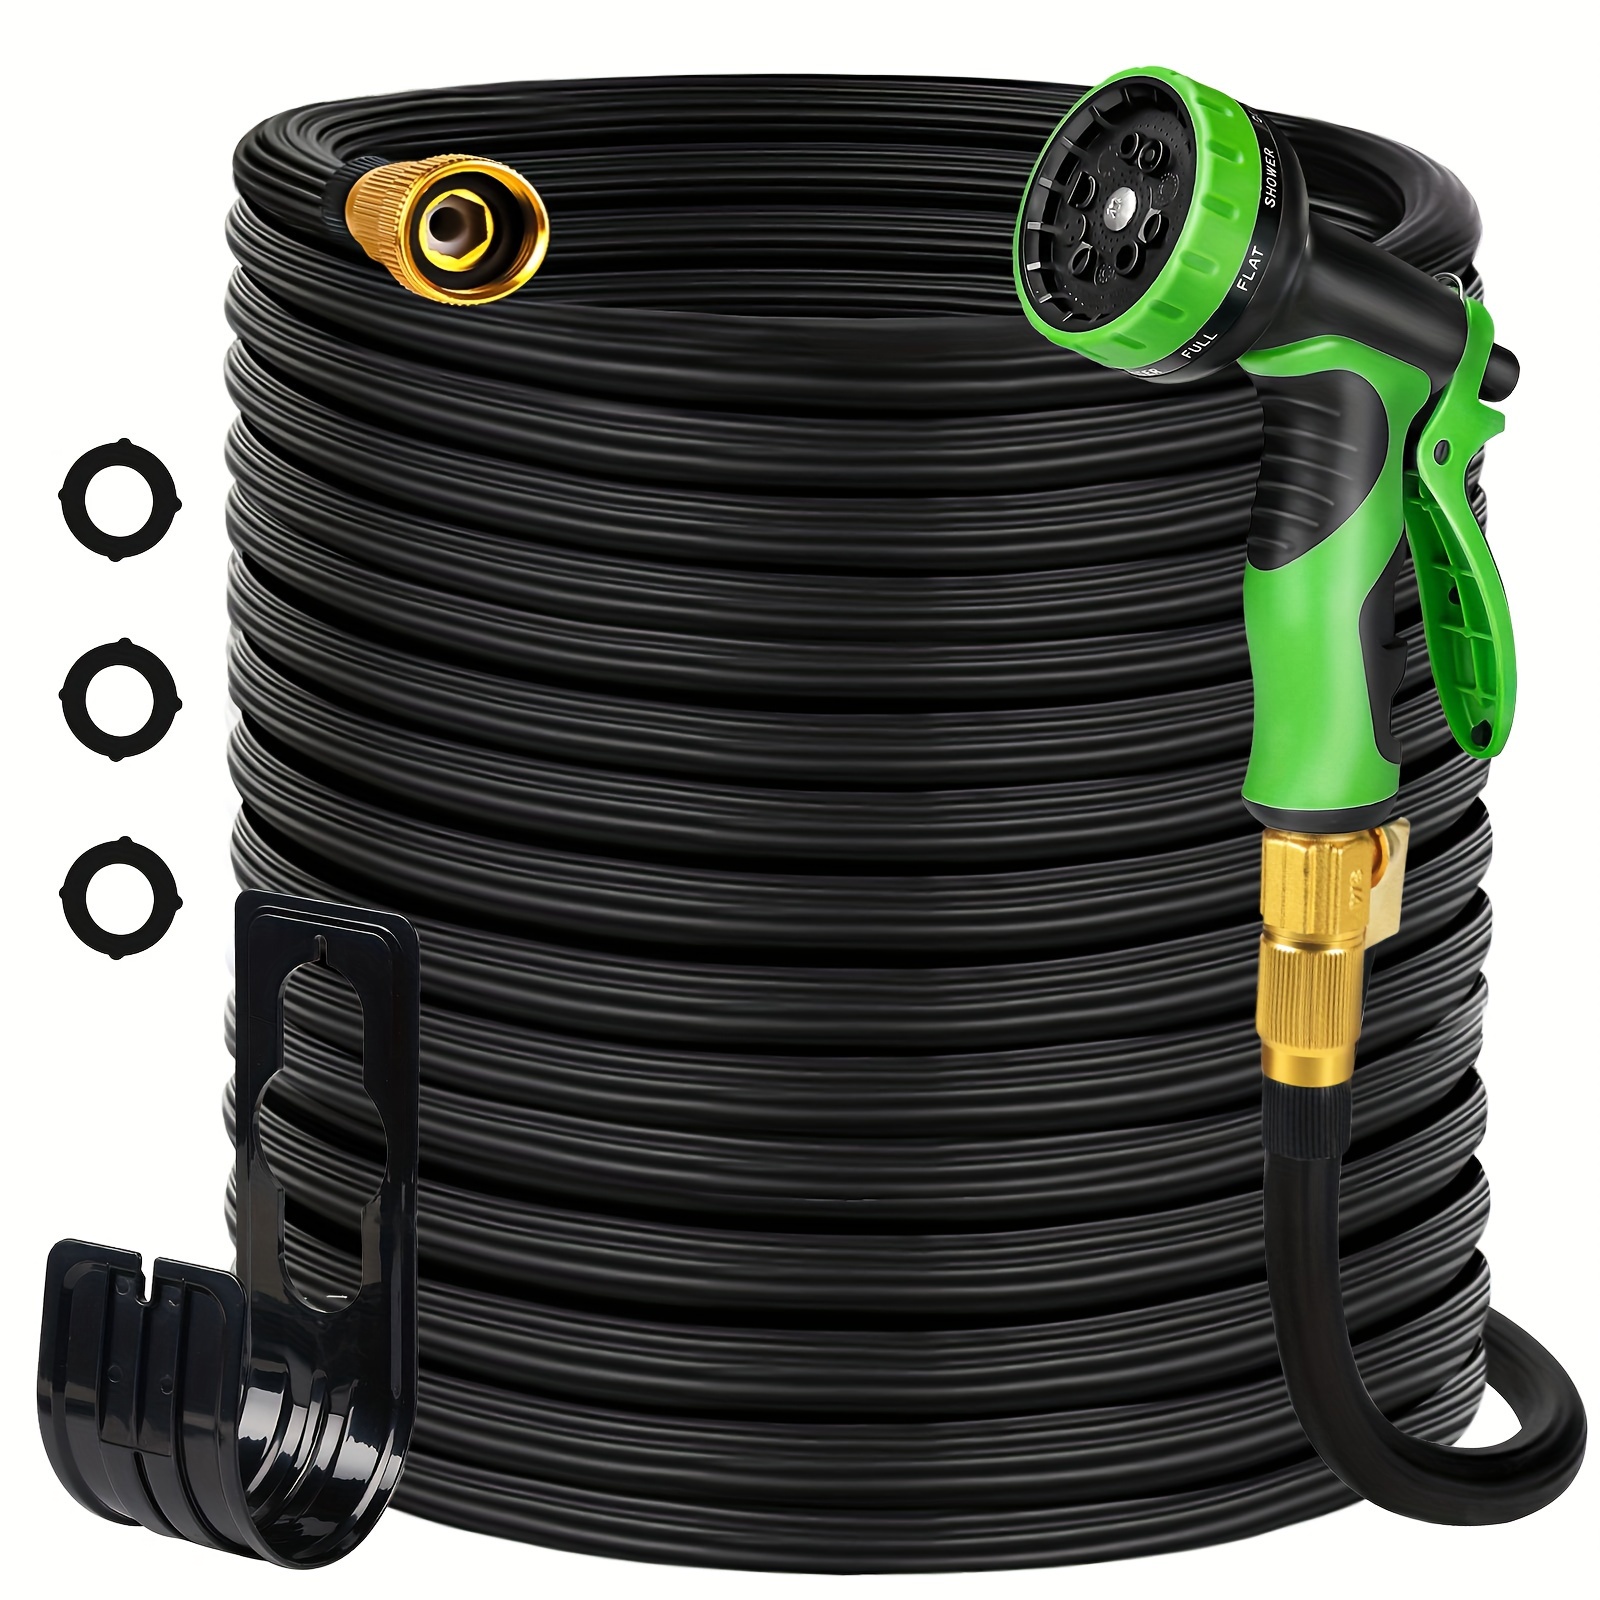 

Garden Hose 100 Ft - Water Hose 100 Ft With 10 Function Hose Nozzle, Lightweight, Kink Free, Expandable Fabric Garden Hose For Outdoor, Garden, Watering, Car Wash, Yard, Lawn And Rv